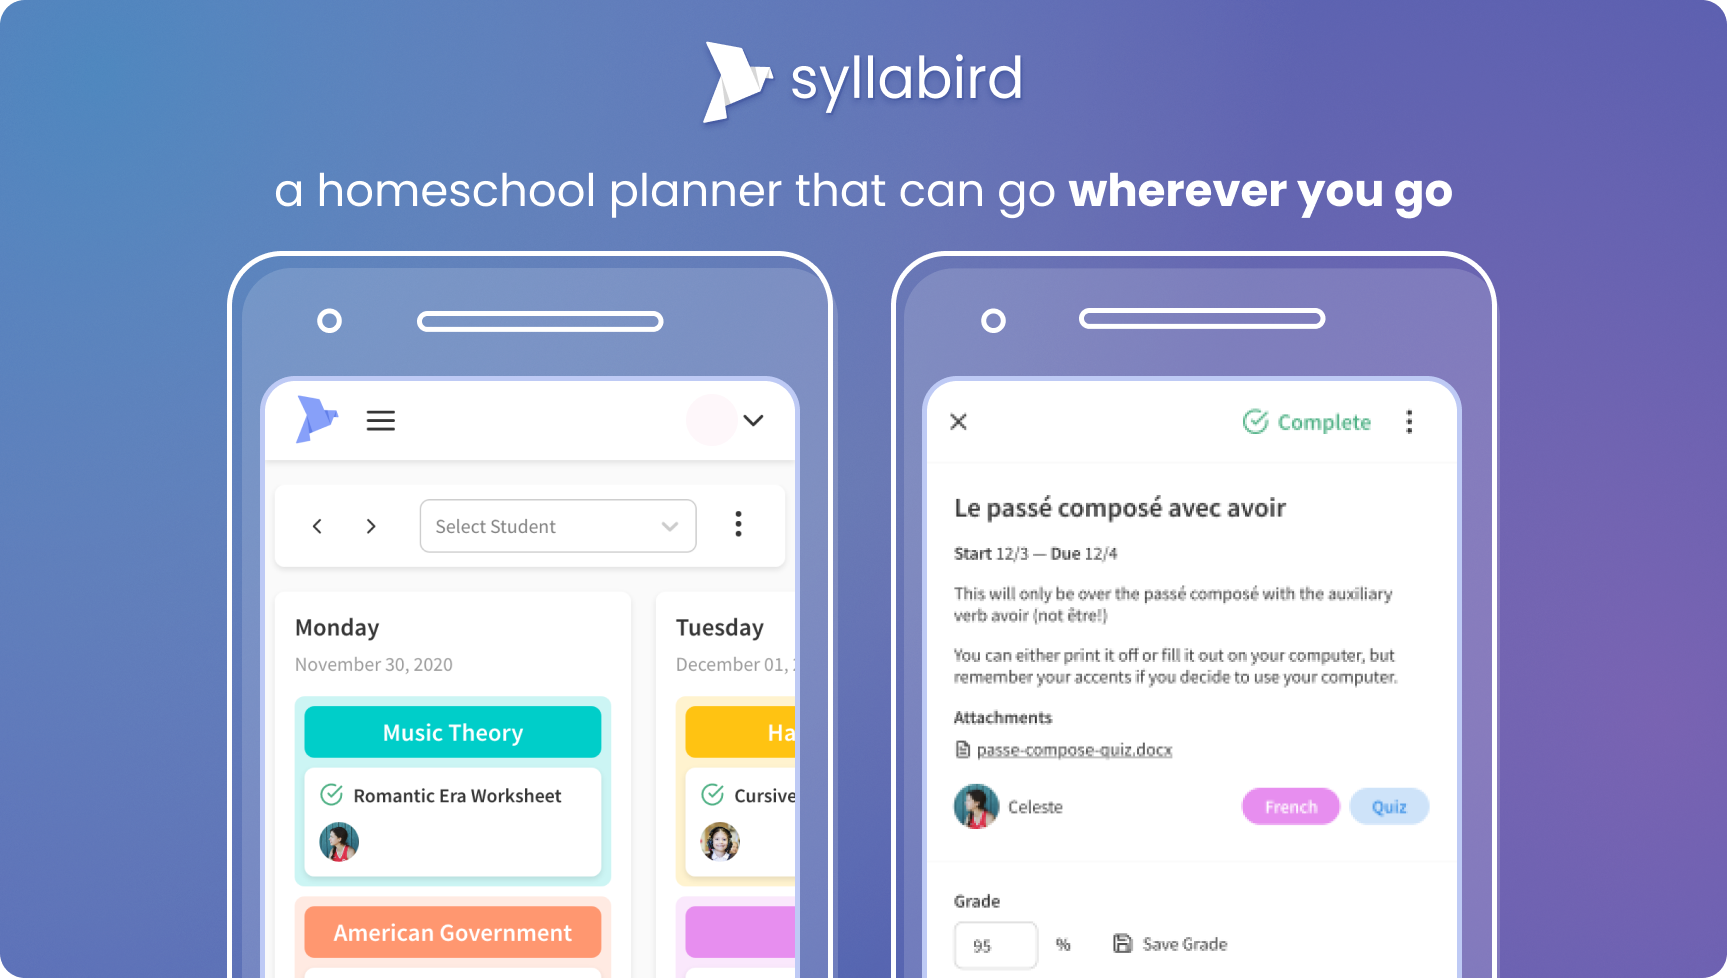 a homeschool planner that can go wherever you go